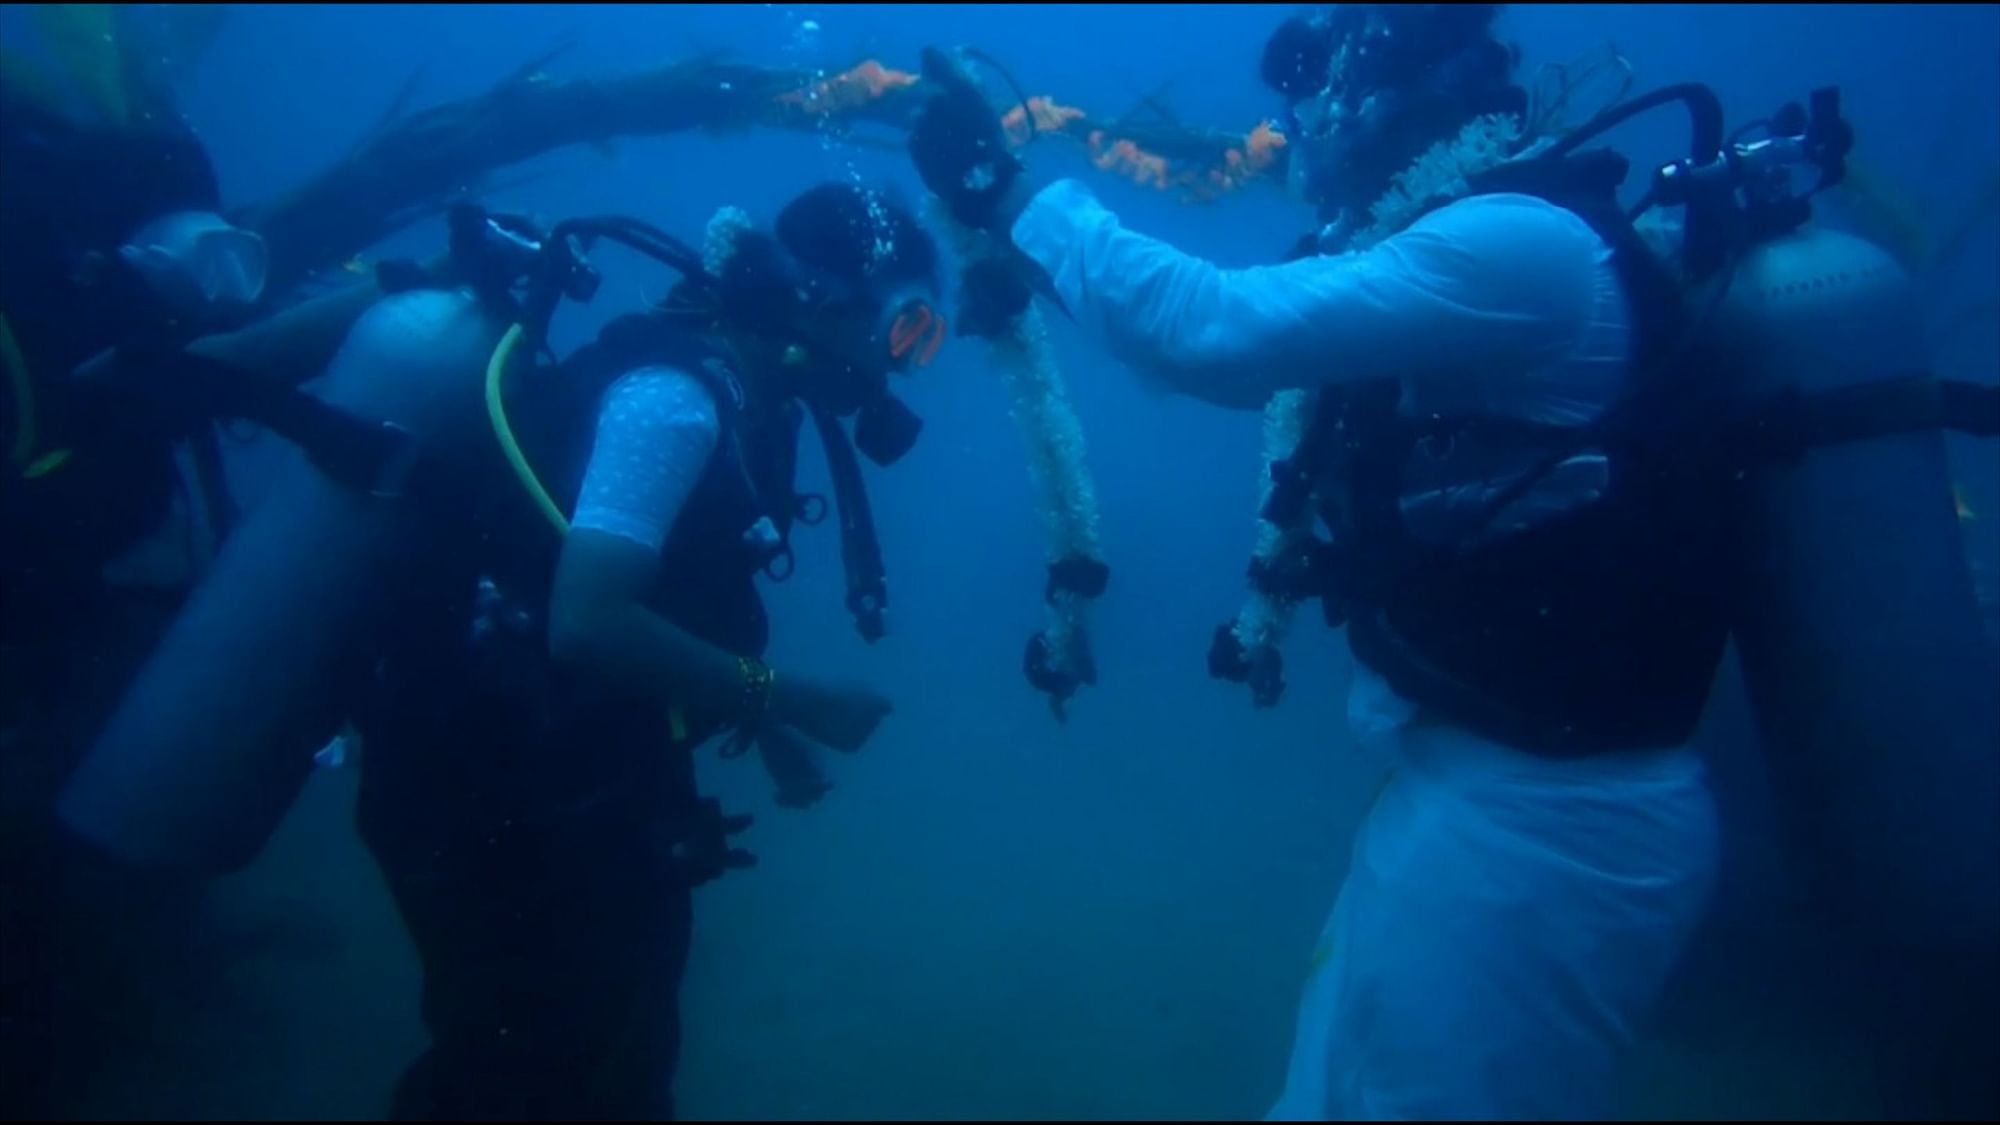 The couple wore clothes that was custom-made for scuba diving.